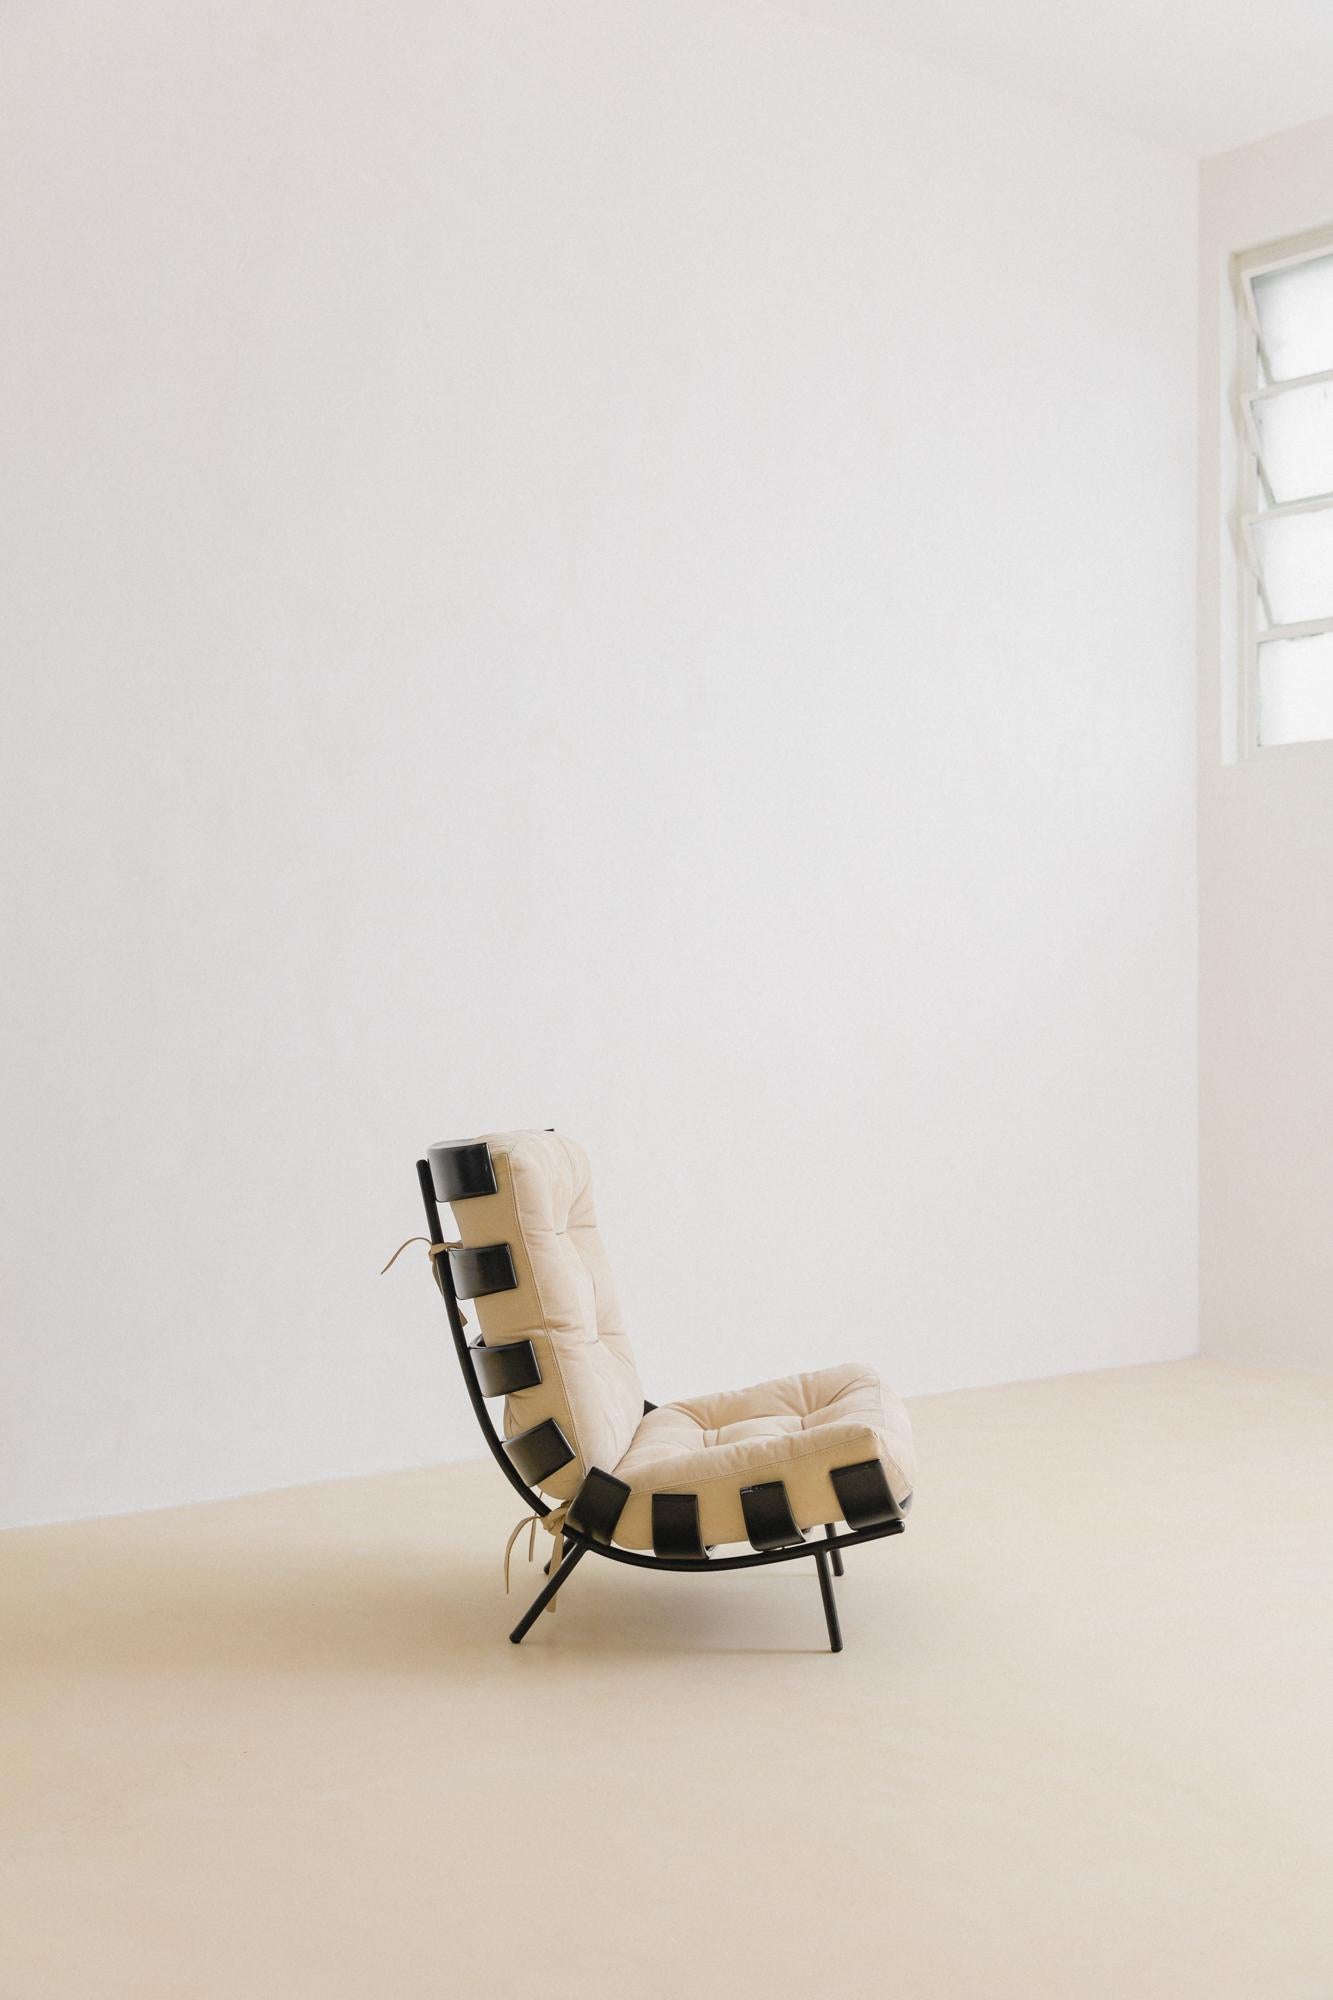 The Costela armchair is an iconic Brazilian Mid-Century Modern piece. It was designed by Martin Eisler (1913 - 1977) in 1953 and manufactured by the companies Móveis Artesanal and Forma S.A. Móveis e Objetos de Arte, where he was partner and